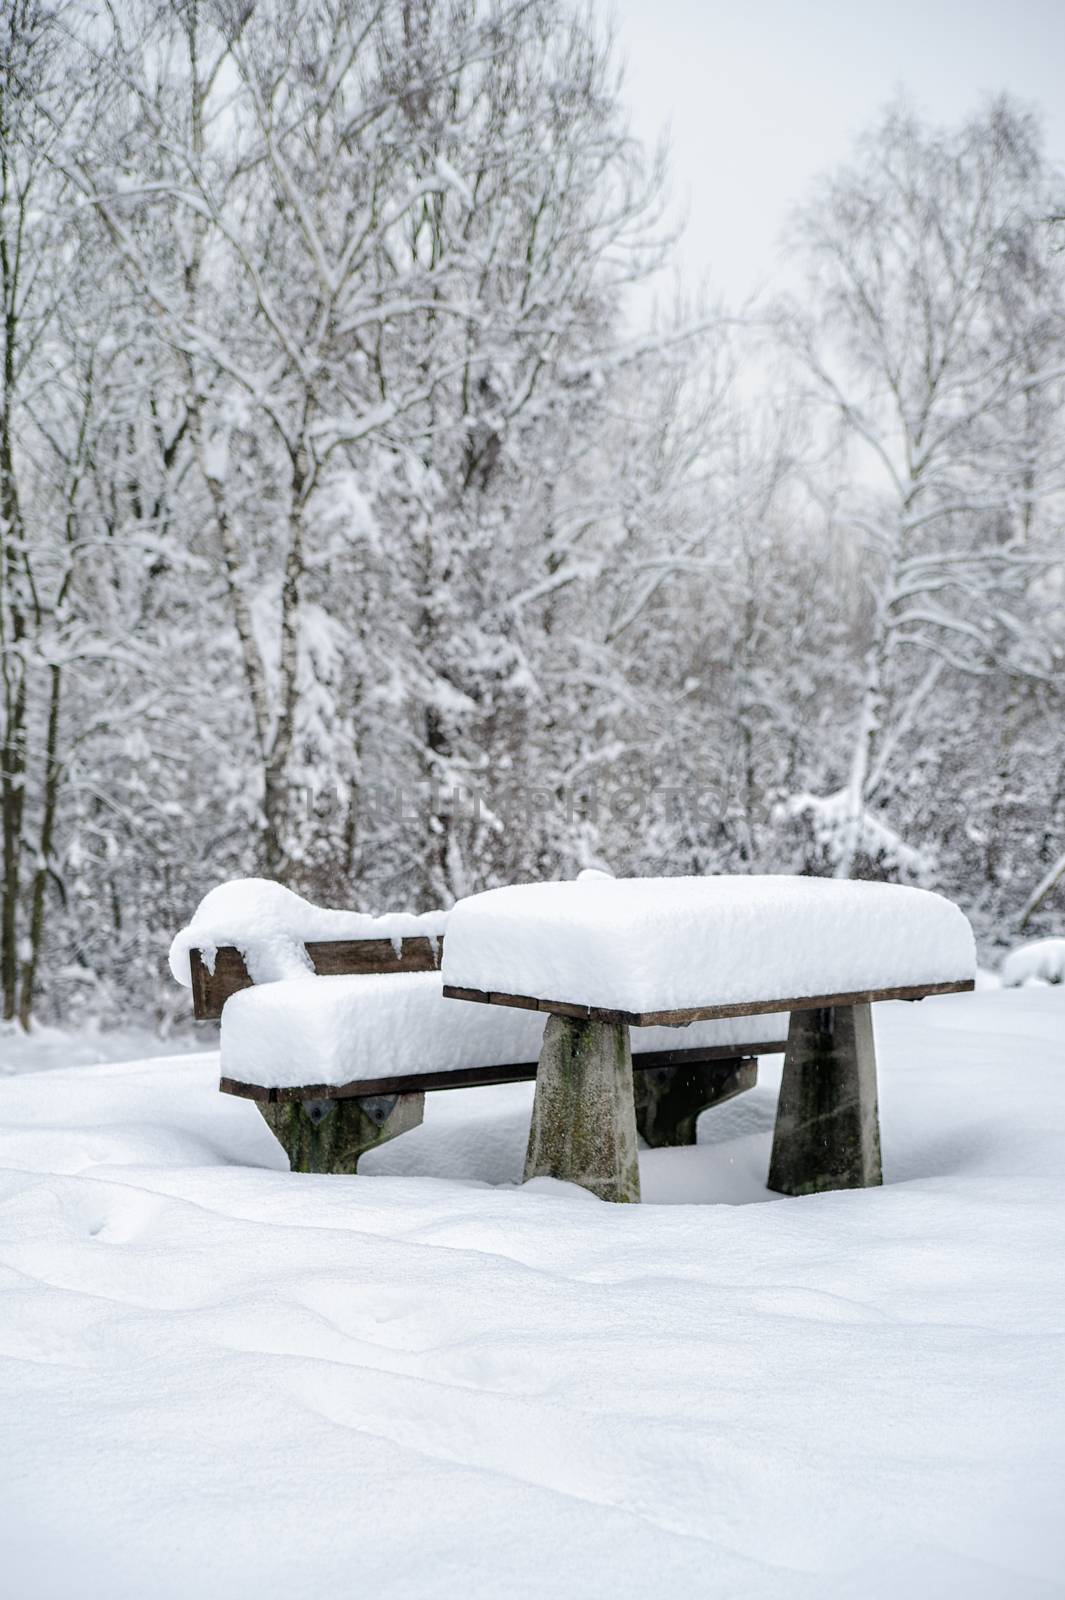 Service area with snowy bench and table